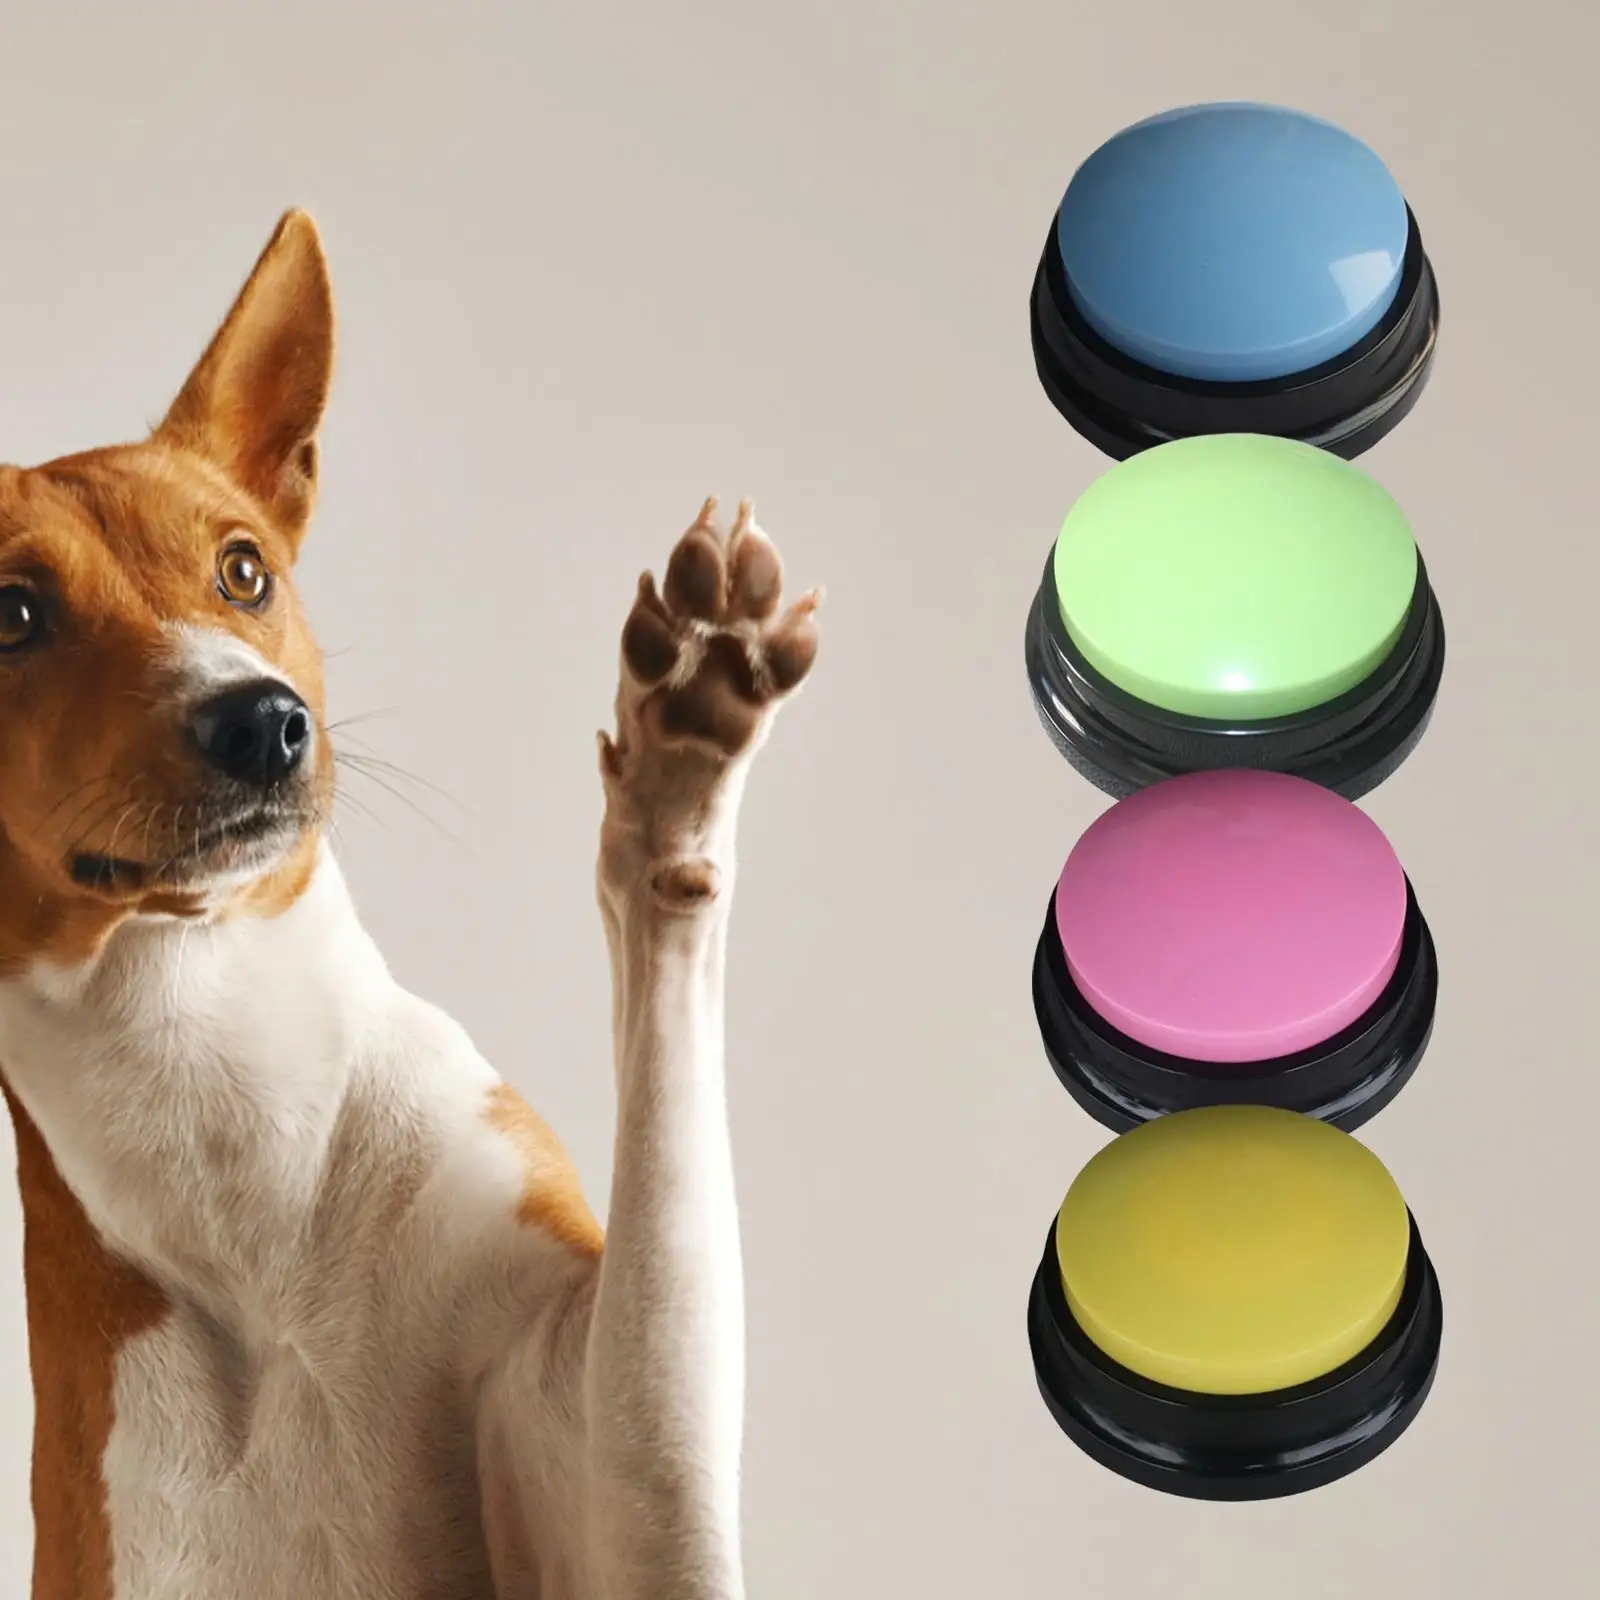 4x Recordable Dog Interactive Toy Noise Makers Squeaks Answer Buzzers Voice Recording Button for Puppy Kitten